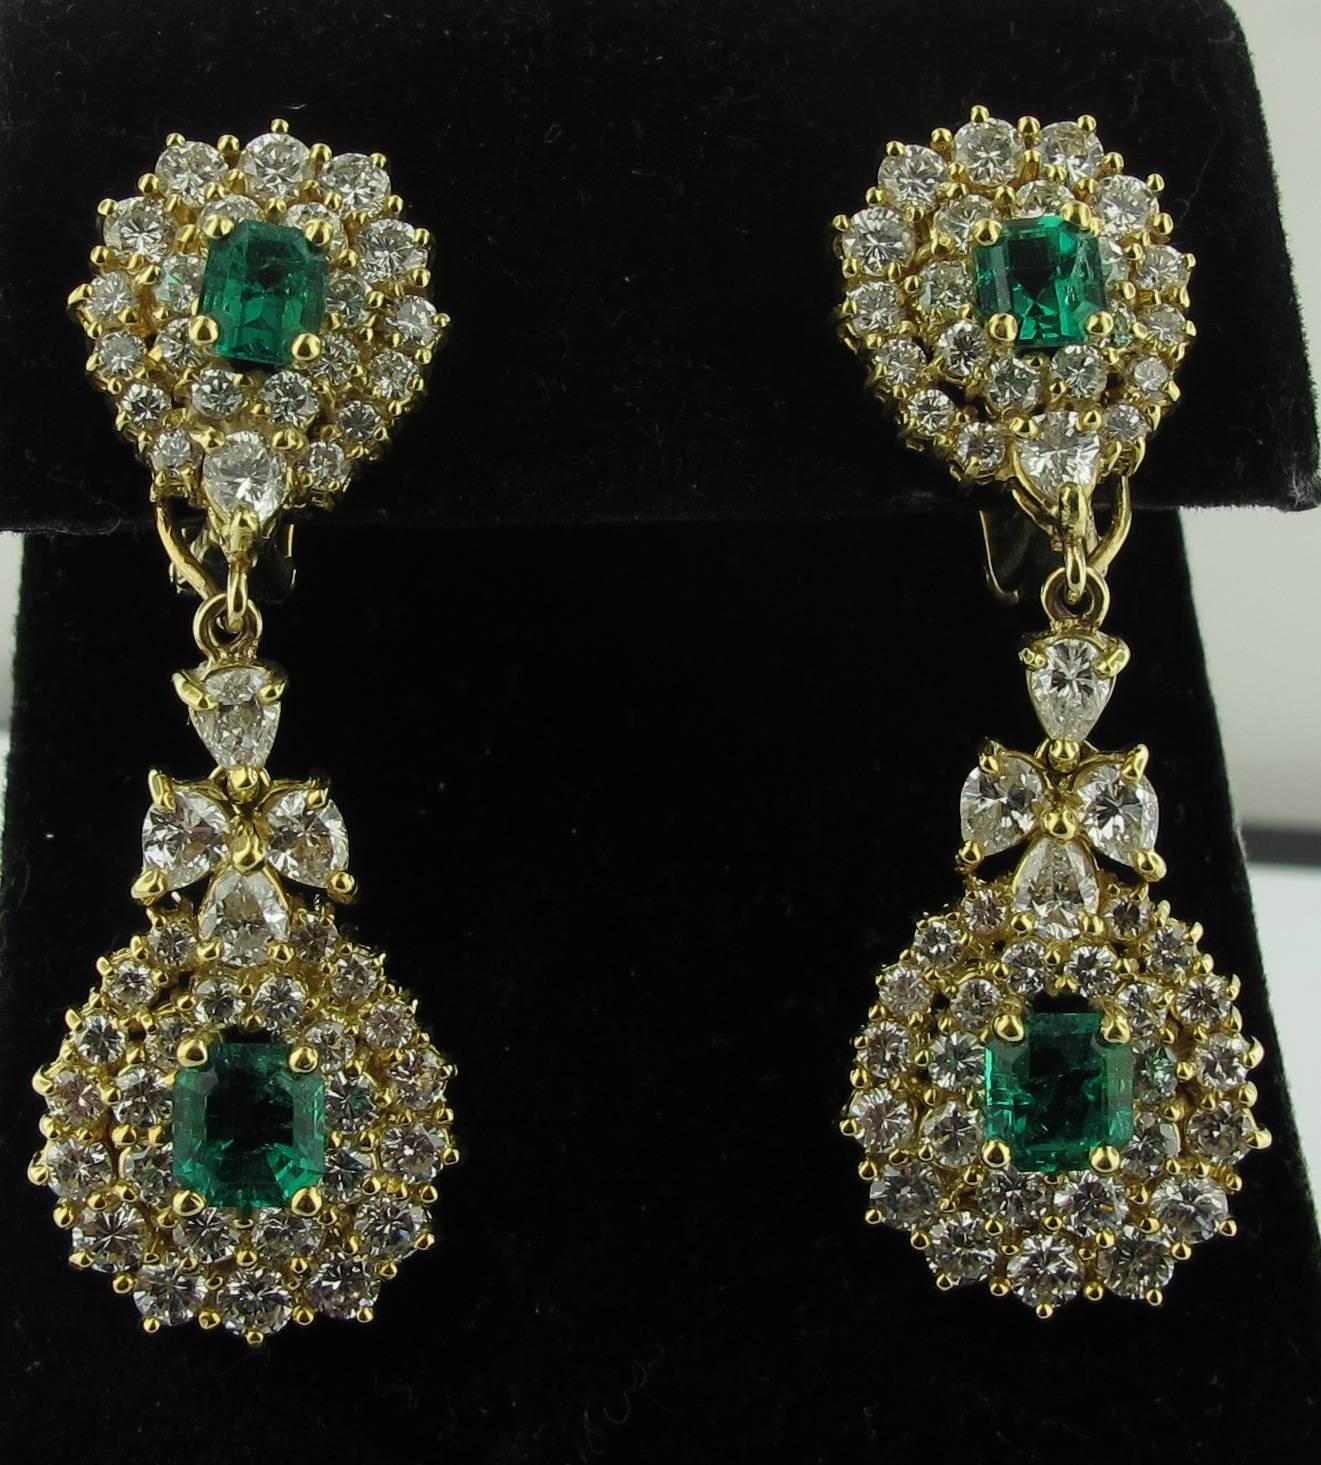 Set in 18 karat yellow gold, these drop earrings are set with 102 round brilliant cut diamonds weighing a total of approximately 5.10 carats, H color, SI clarity and feature four Columbian Emeralds weighing a total of approximately 2.07 carats.   17